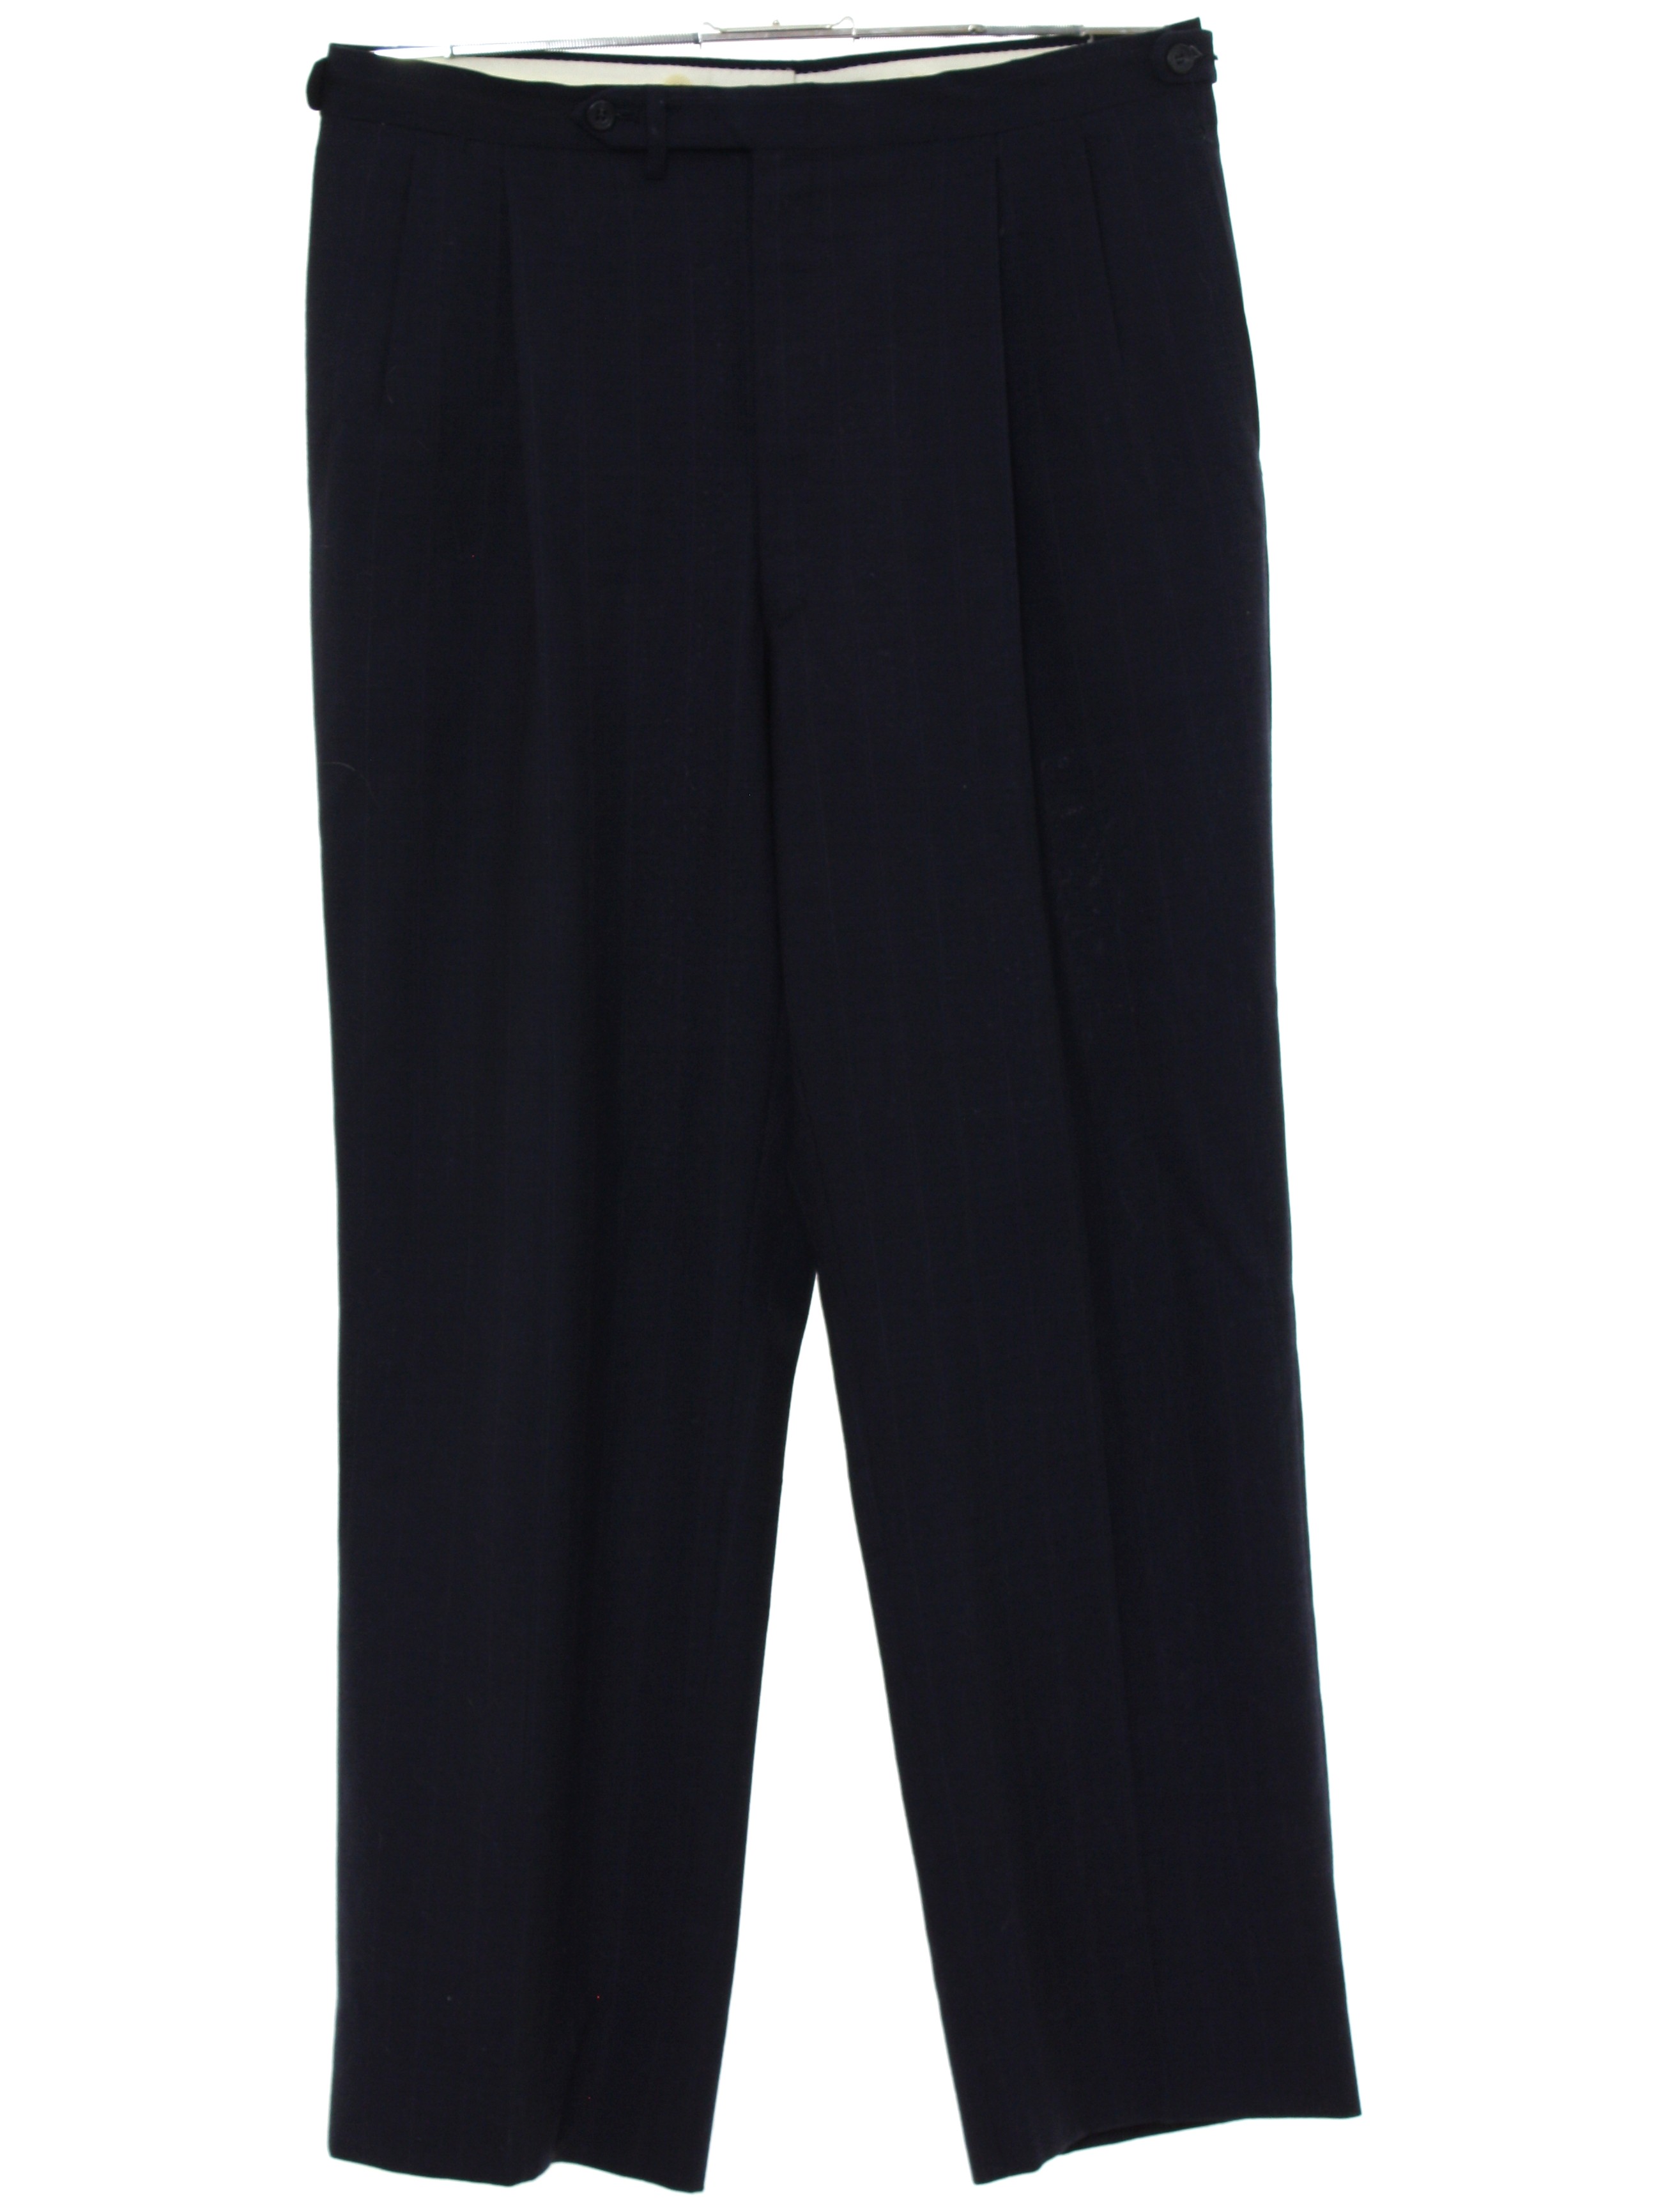 Eighties Pants: 80s -No Label- Mens midnight blue wool polyester blend ...